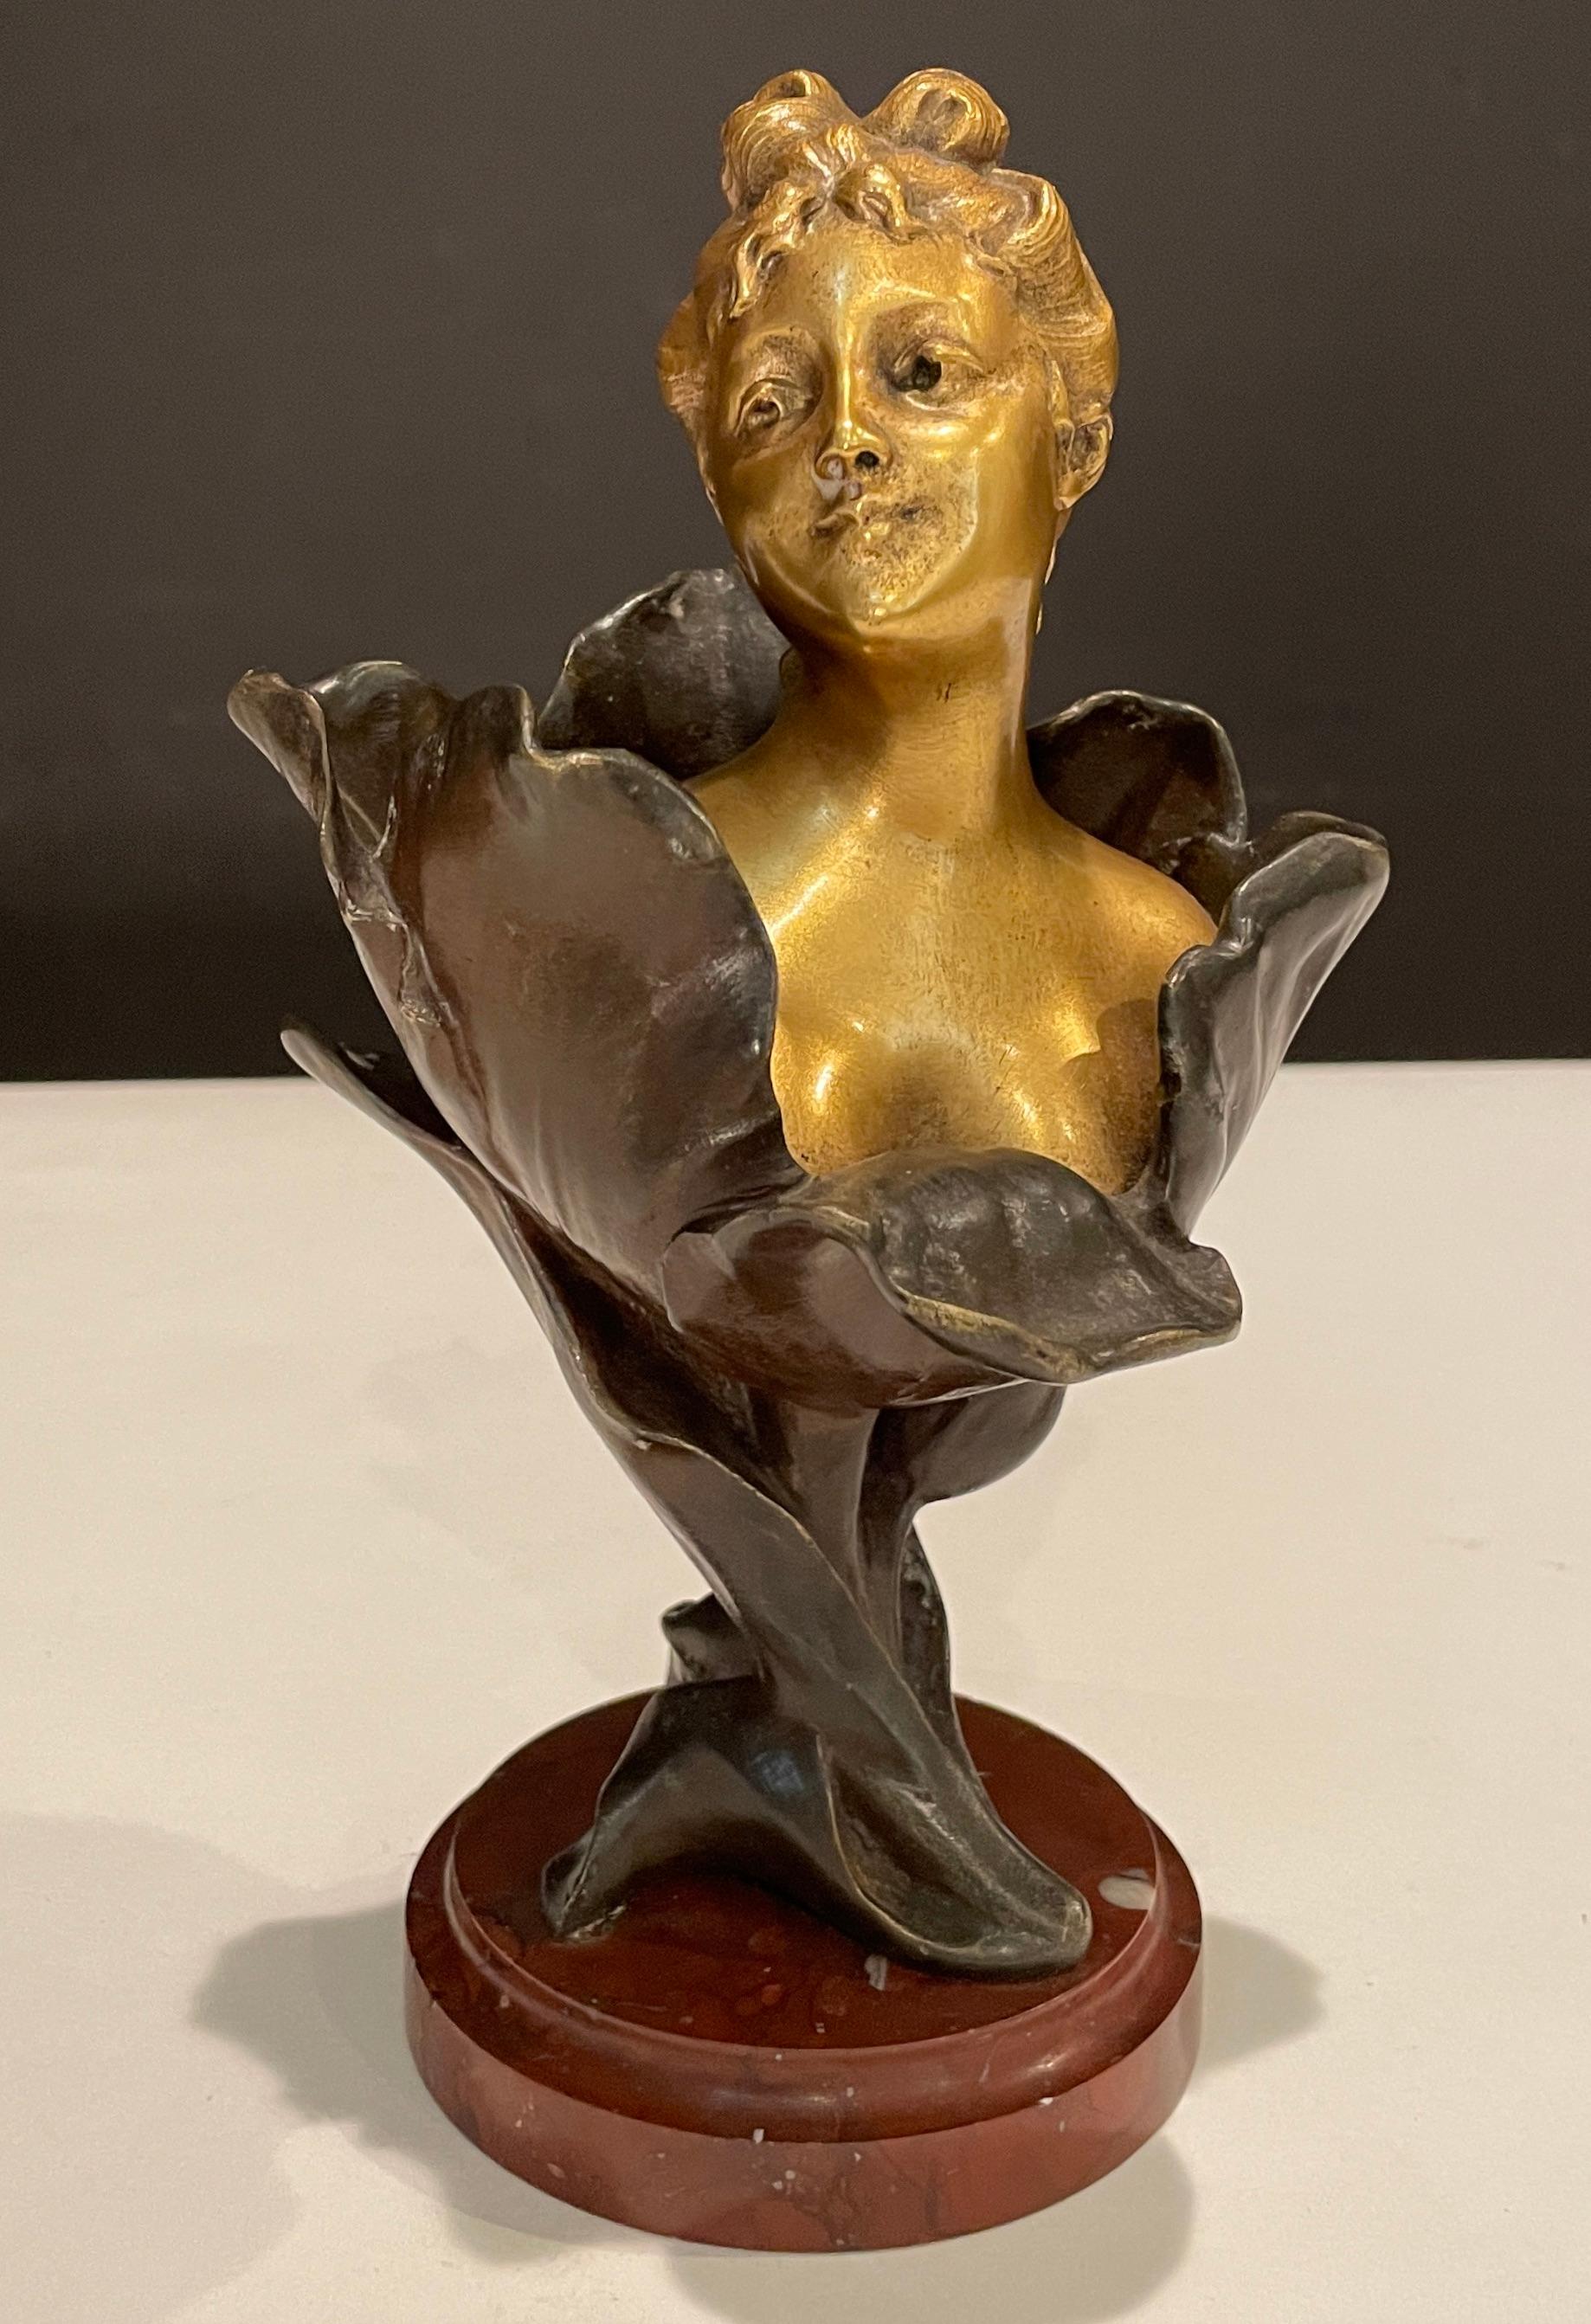 French Gilt And Patinated Bronze Bust By Henri Godet “Femme Tulipe” For Sale